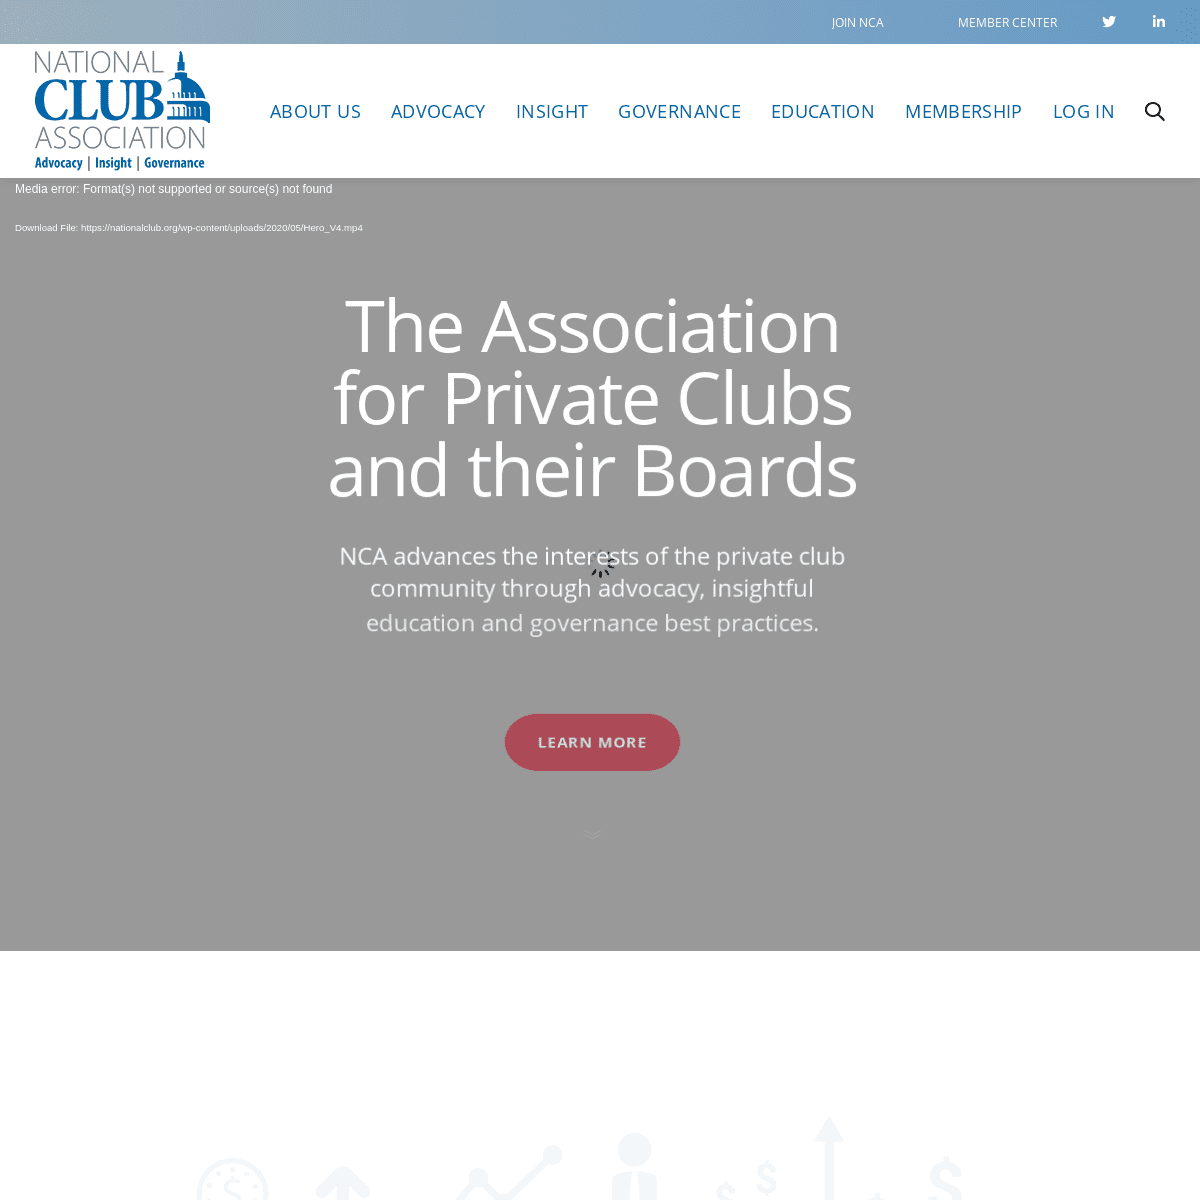 A complete backup of https://nationalclub.org